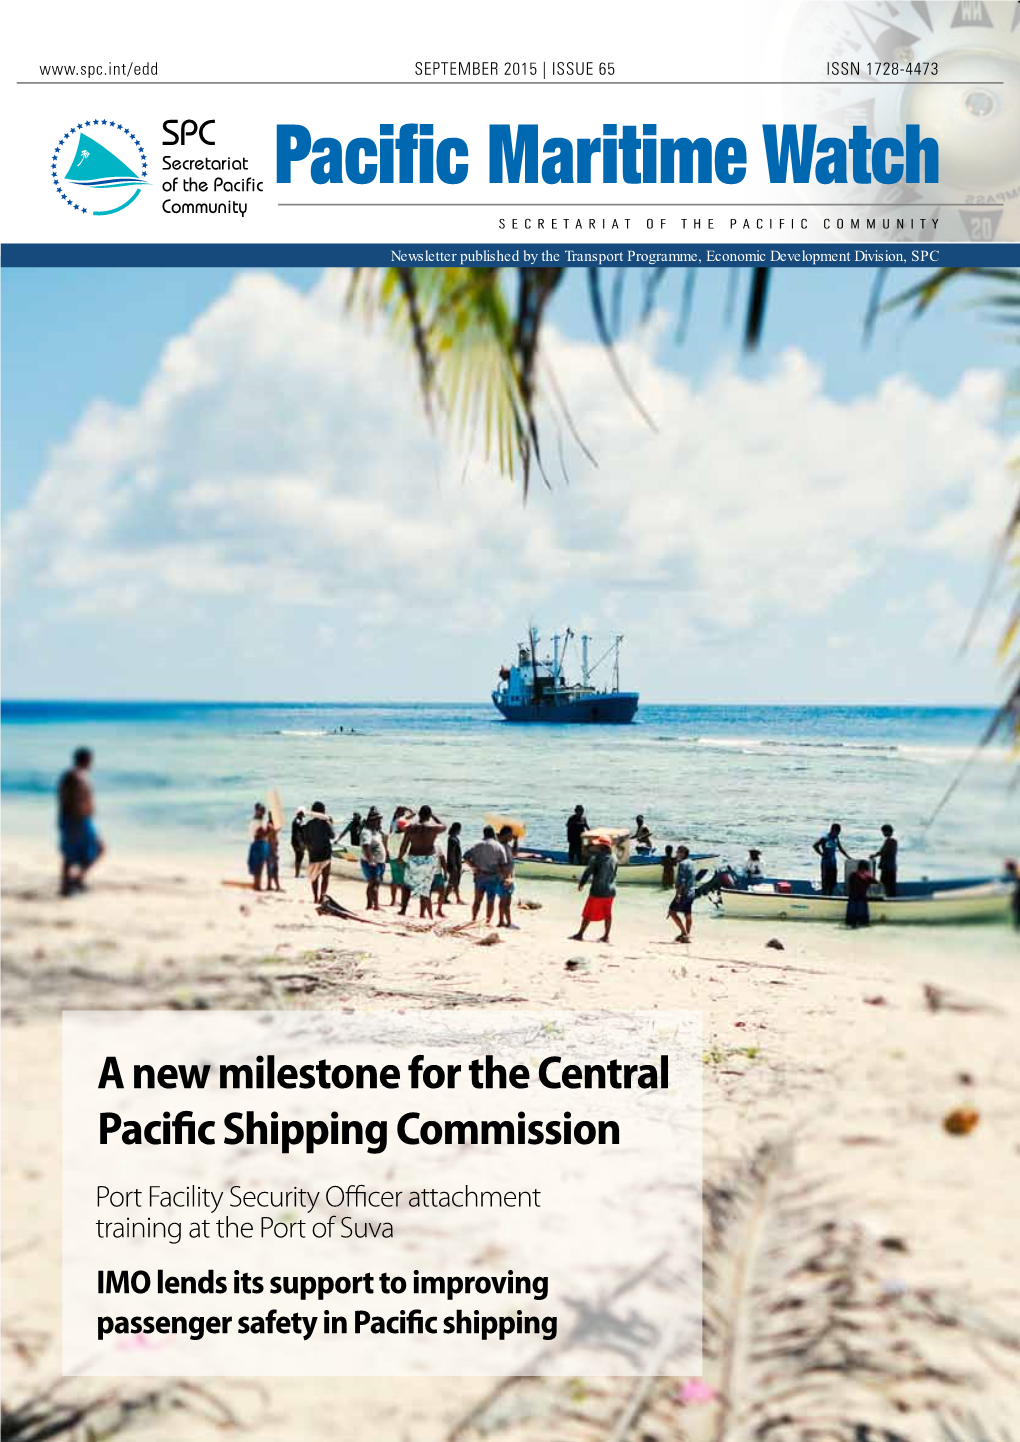 A New Milestone for the Central Pacific Shipping Commission